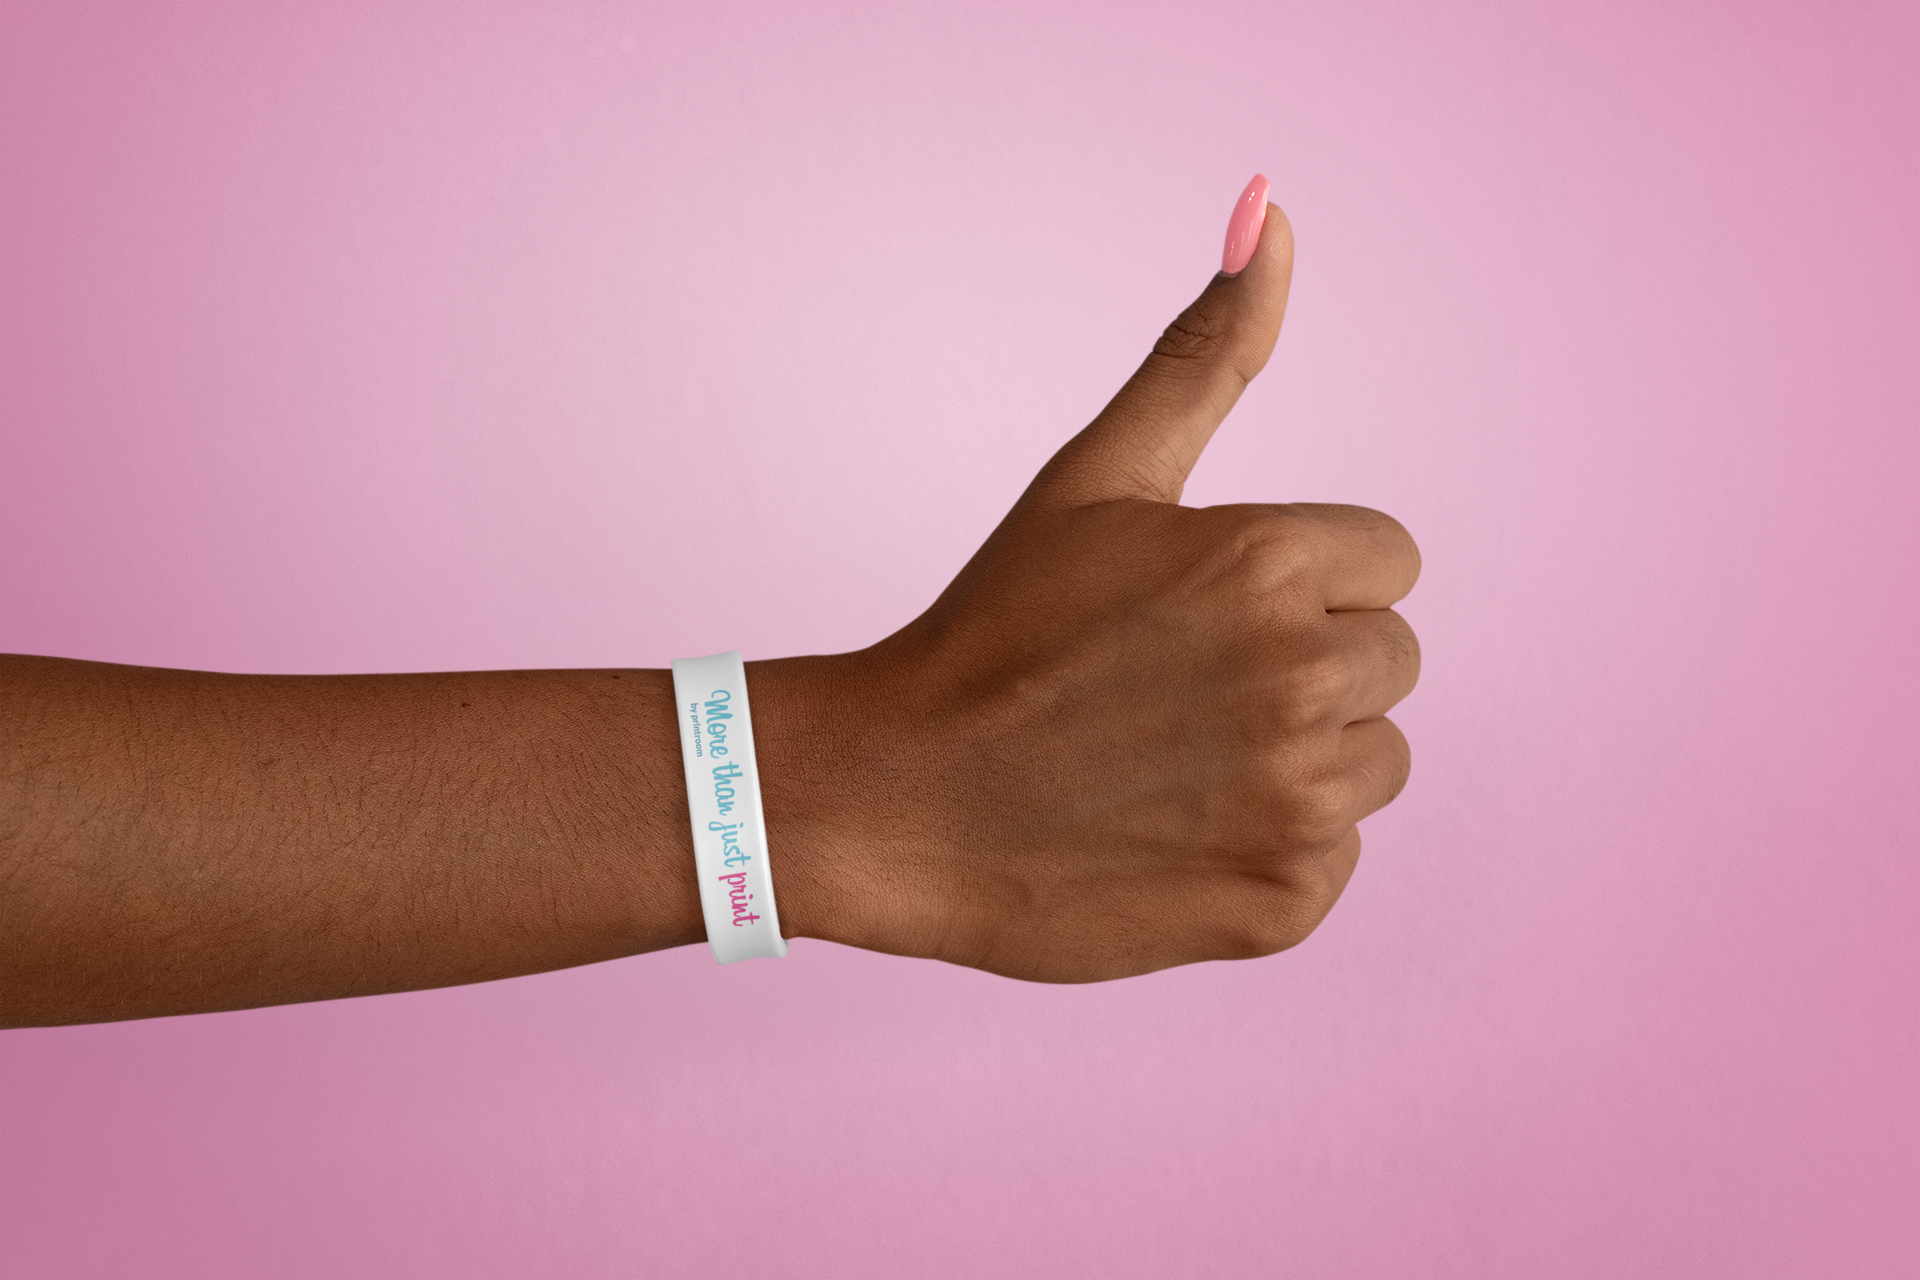  Strengthening Event Security: The Comprehensive Guide to Using Wristbands